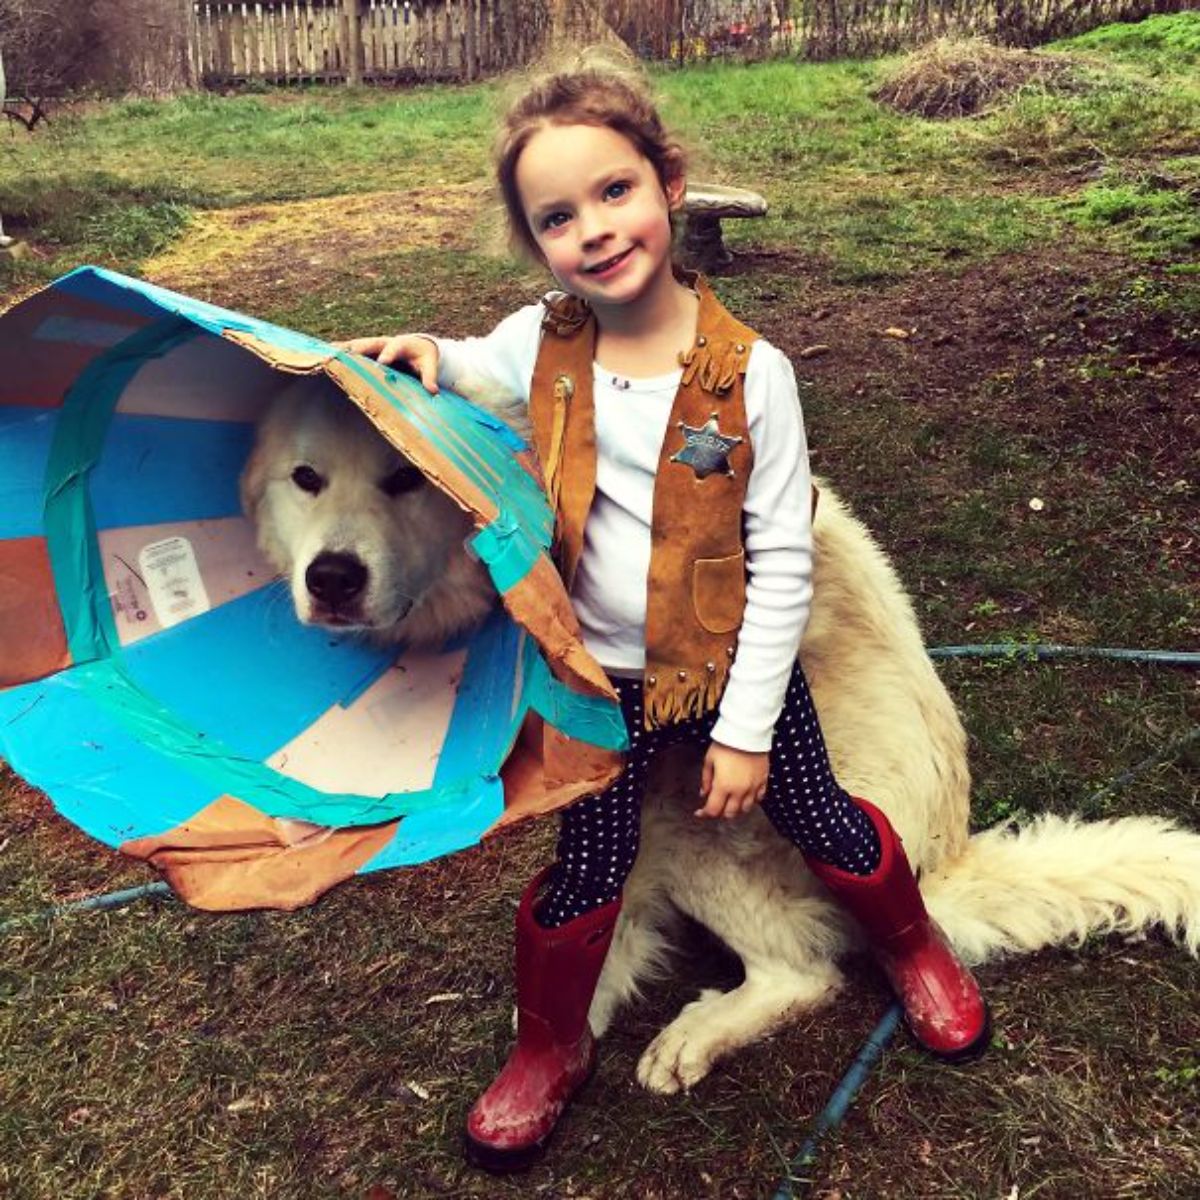 fluffy white dog wearing a large diy blue and brown cardboard cone of shame with a little girl posing next to the dog